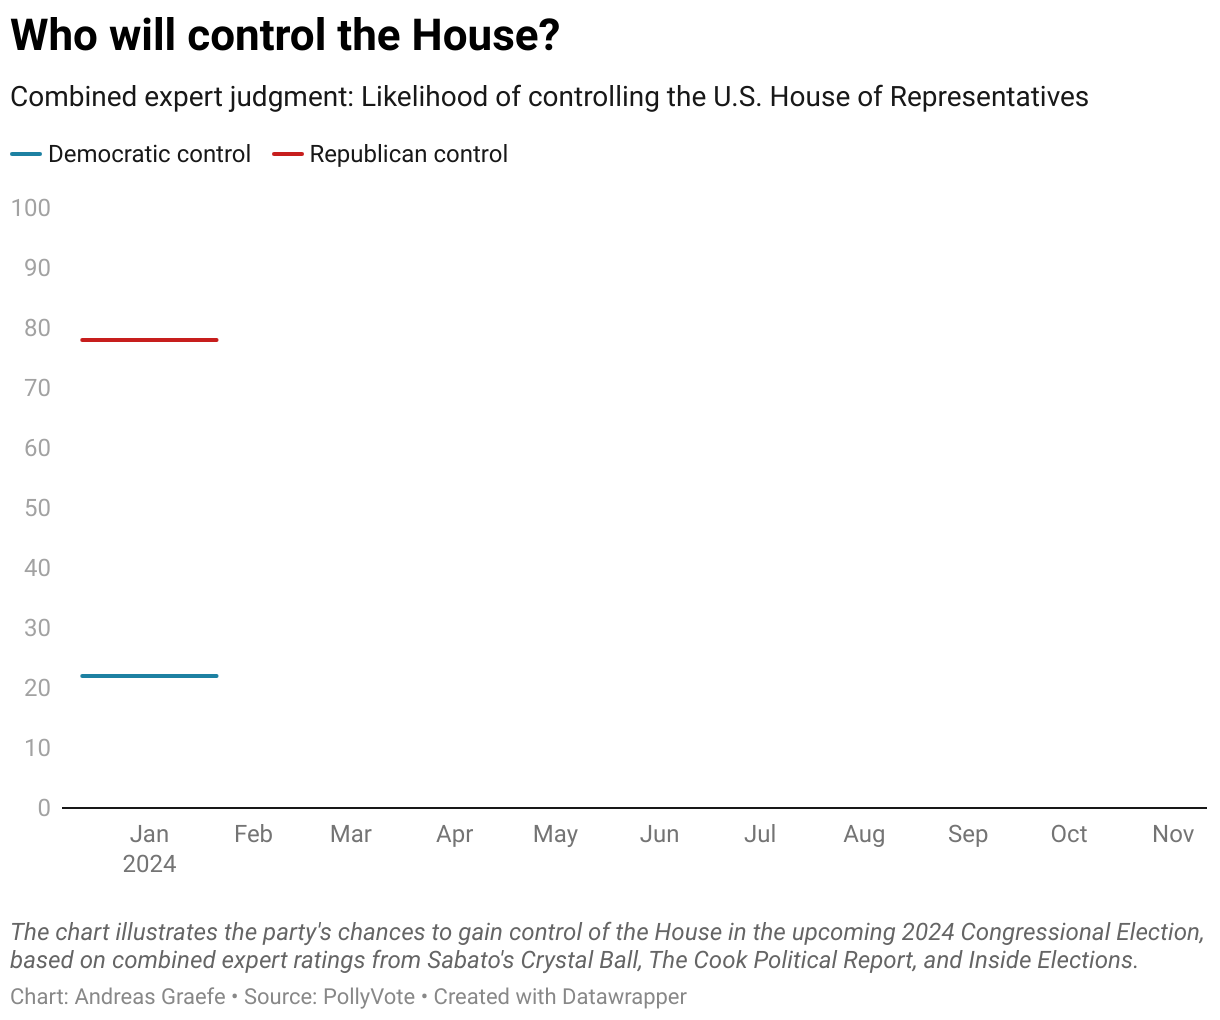 The chart illustrates the party's chances to gain control of the House in the upcoming 2024 Congressional Election, based on combined expert ratings from Sabato's Crystal Ball, The Cook Political Report, and Inside Elections.